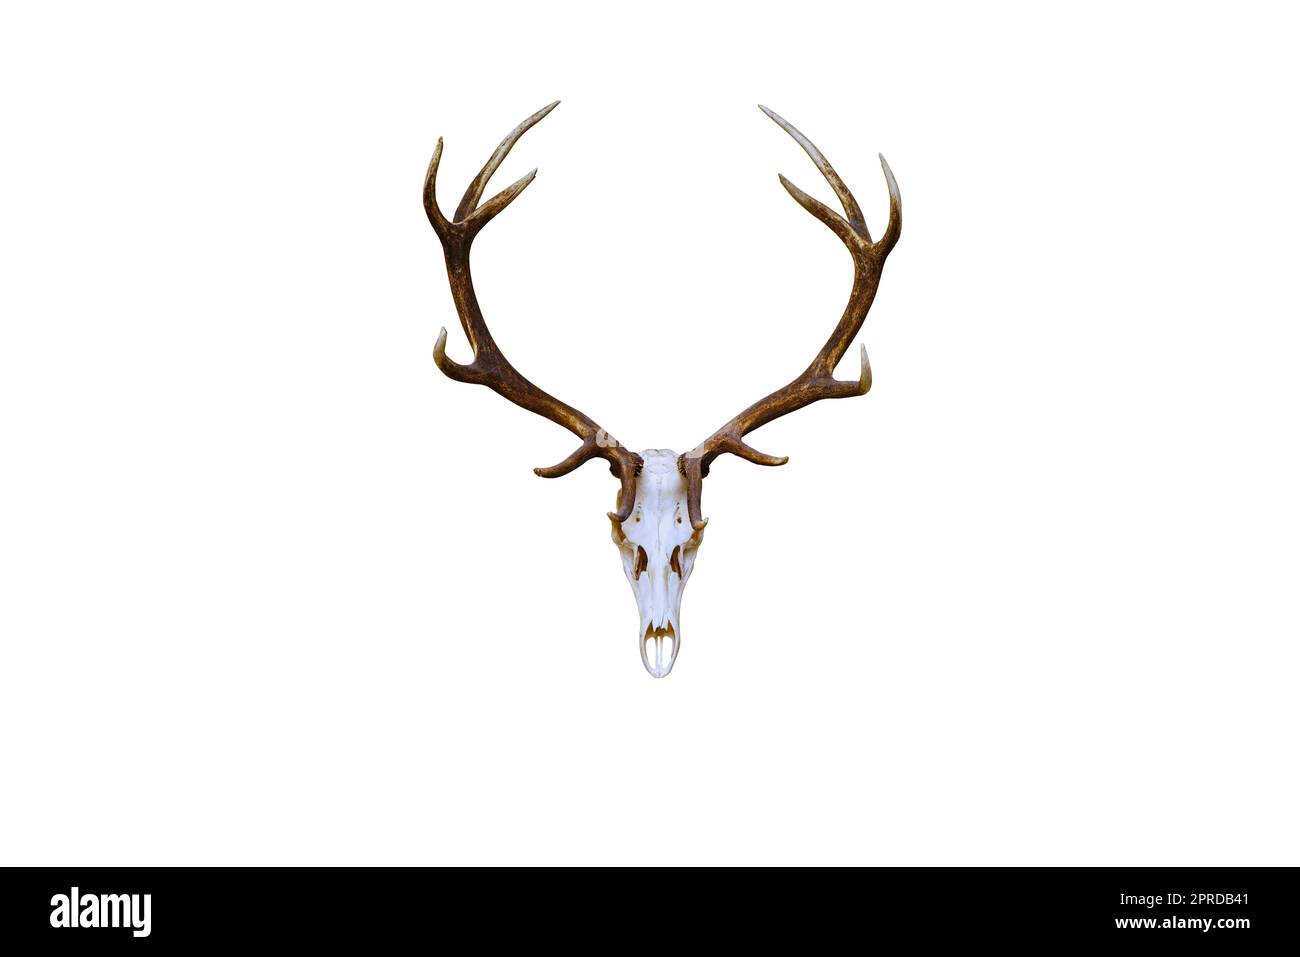 Large deer antlers on a white background Stock Photo